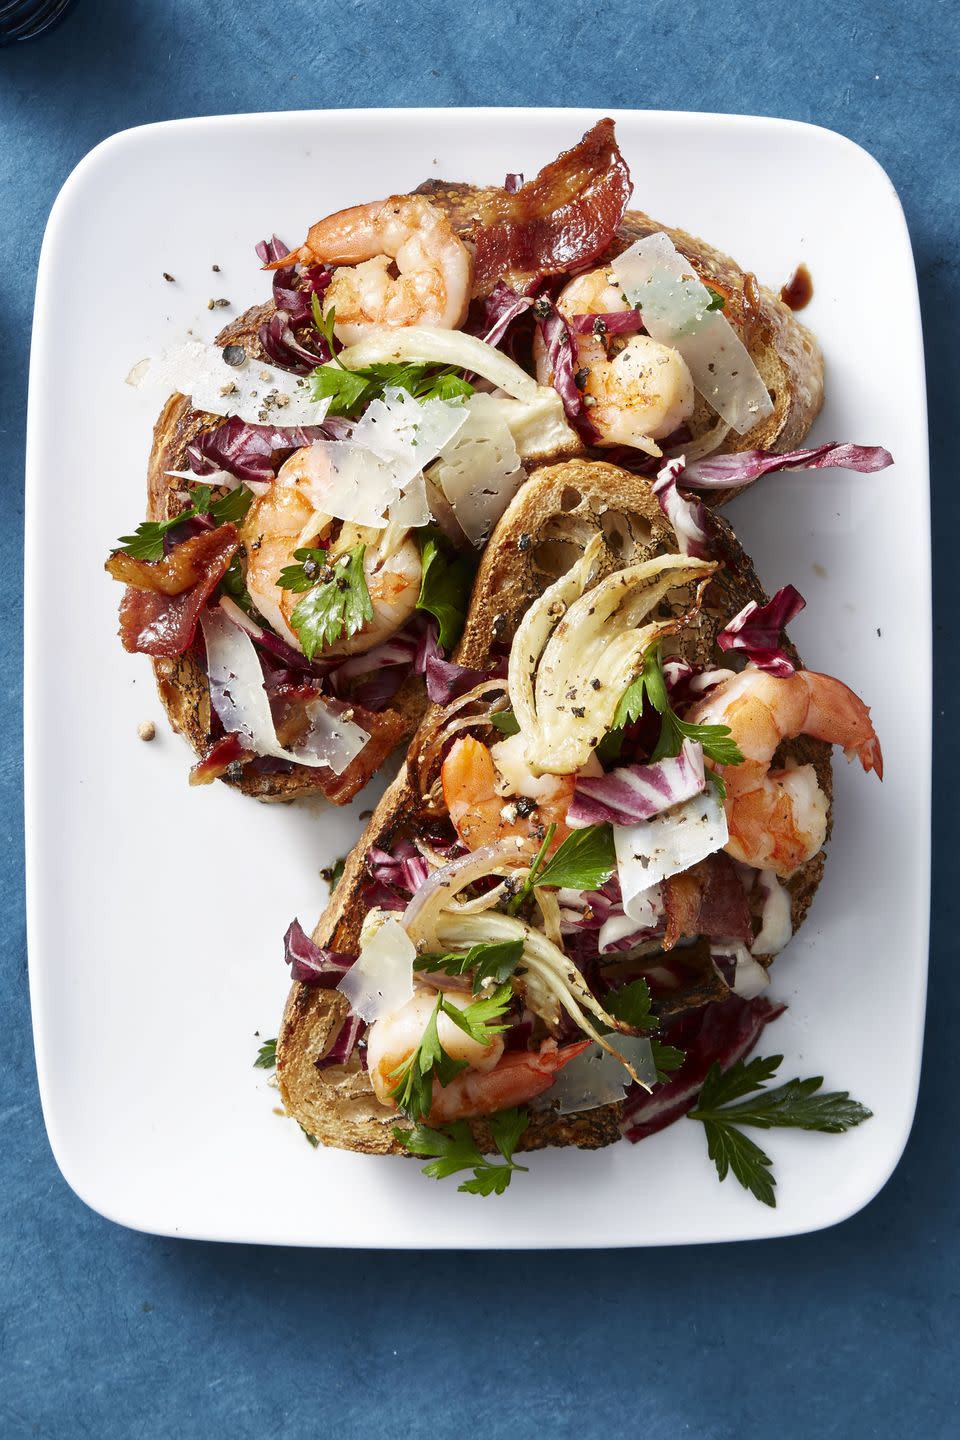 <p>Salad on toast?! Well, life is all about balance. </p><p><em><a href="https://www.goodhousekeeping.com/food-recipes/easy/a46932/radicchio-salad-with-roasted-fennel-and-shrimp-recipe/" rel="nofollow noopener" target="_blank" data-ylk="slk:Get the recipe »" class="link rapid-noclick-resp">Get the recipe »</a></em> </p>